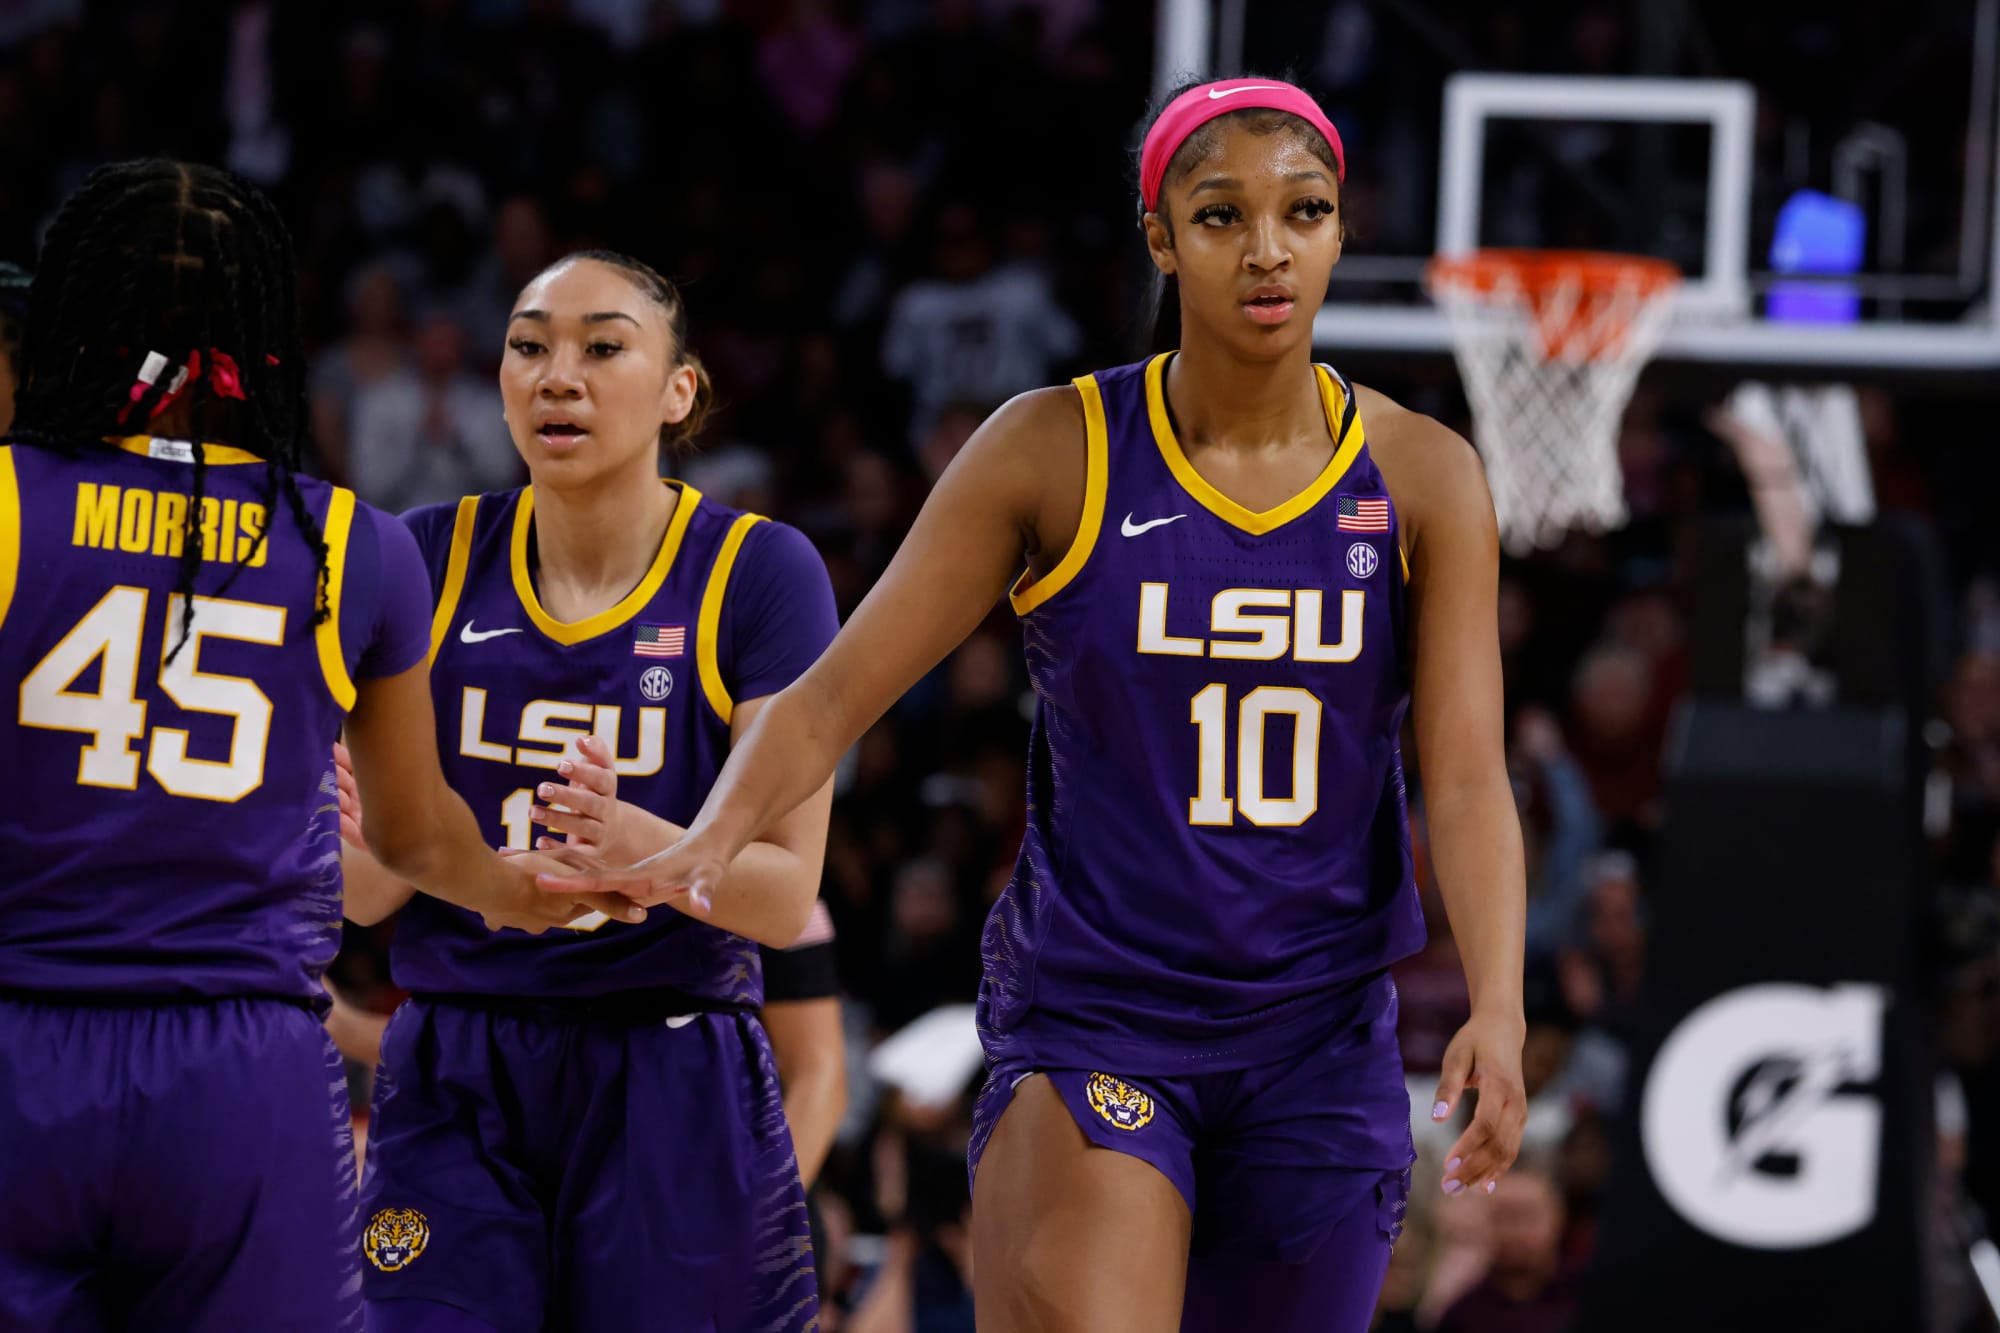 Angel Reese continues to uplift LSU while breaking down double standards